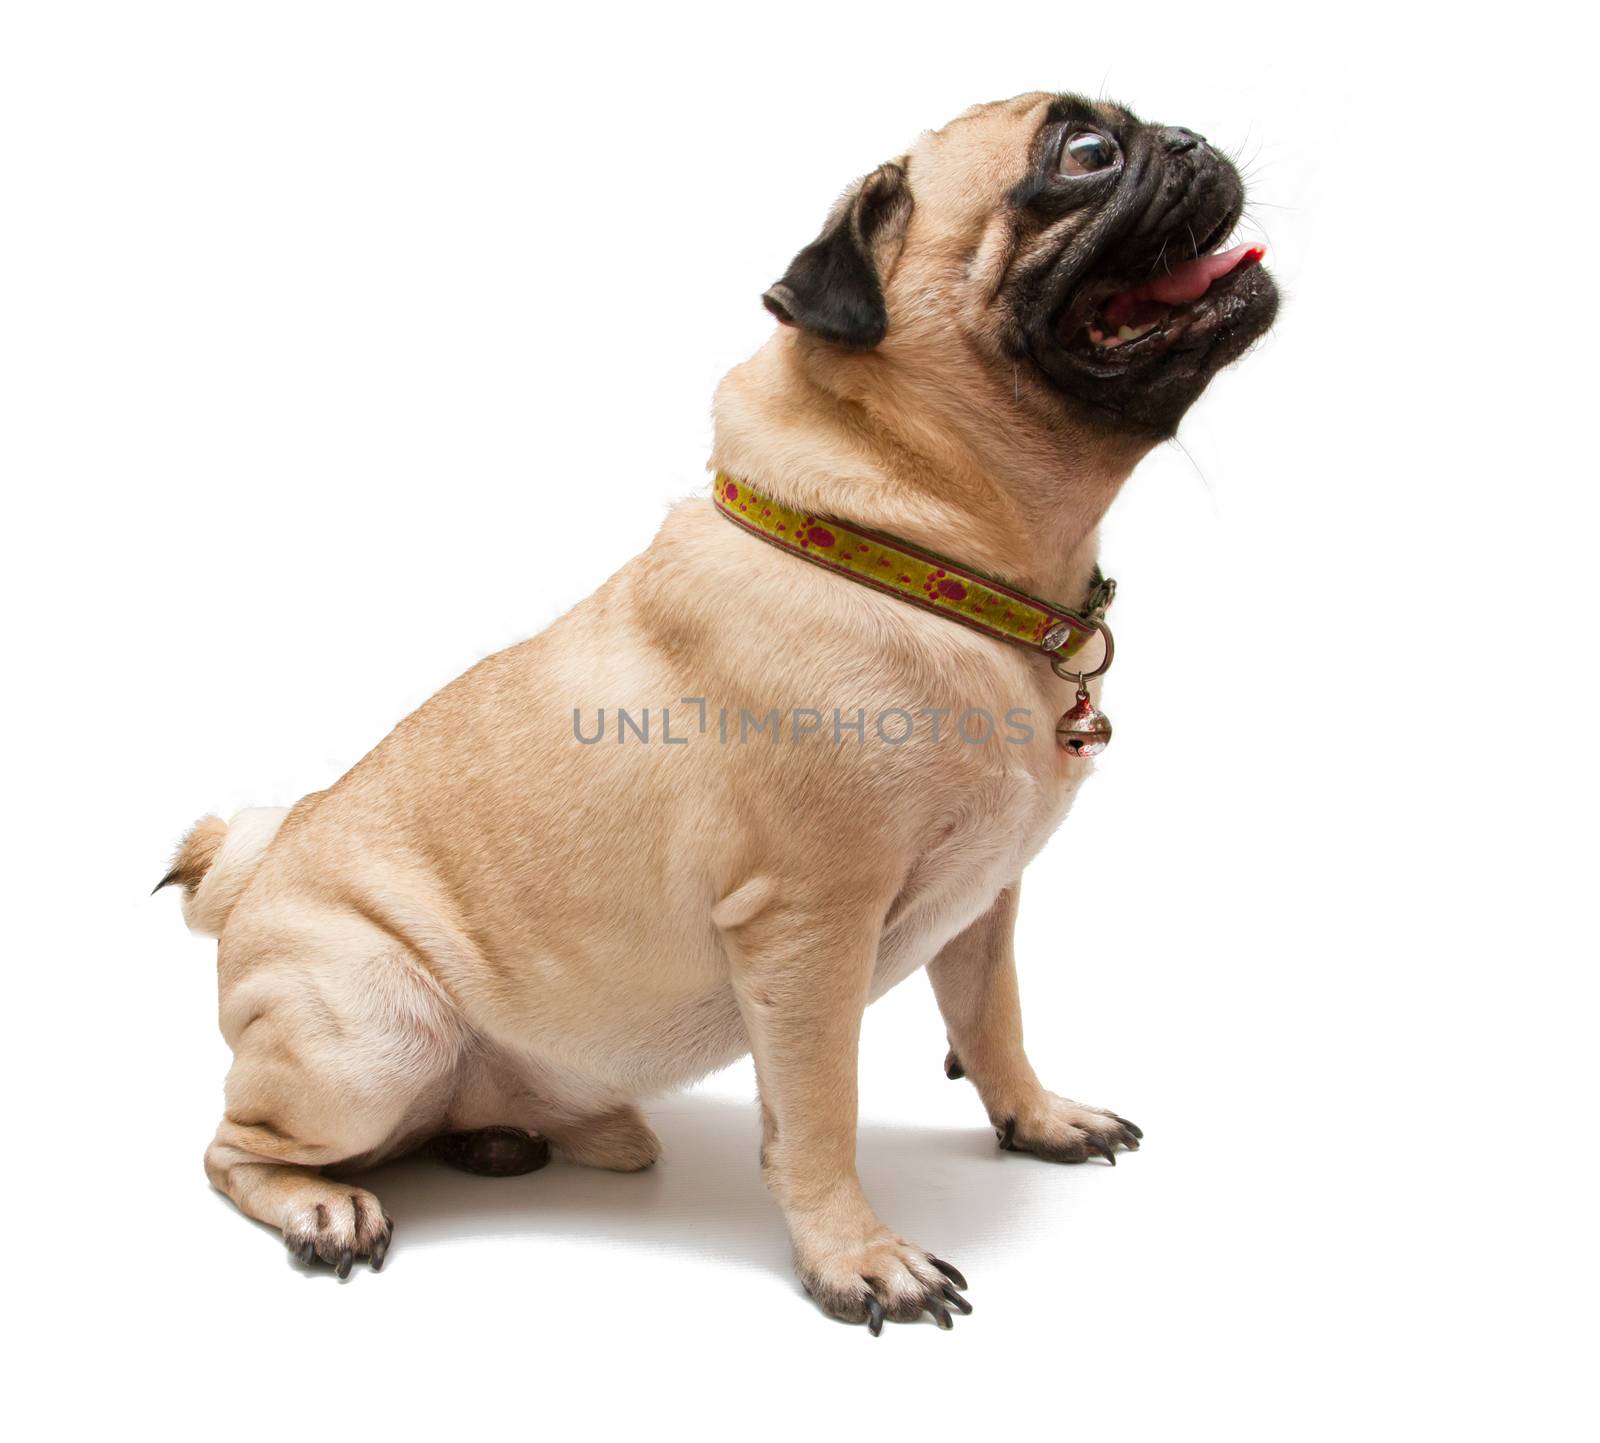 A Pug Dog on white background. by ronnarong